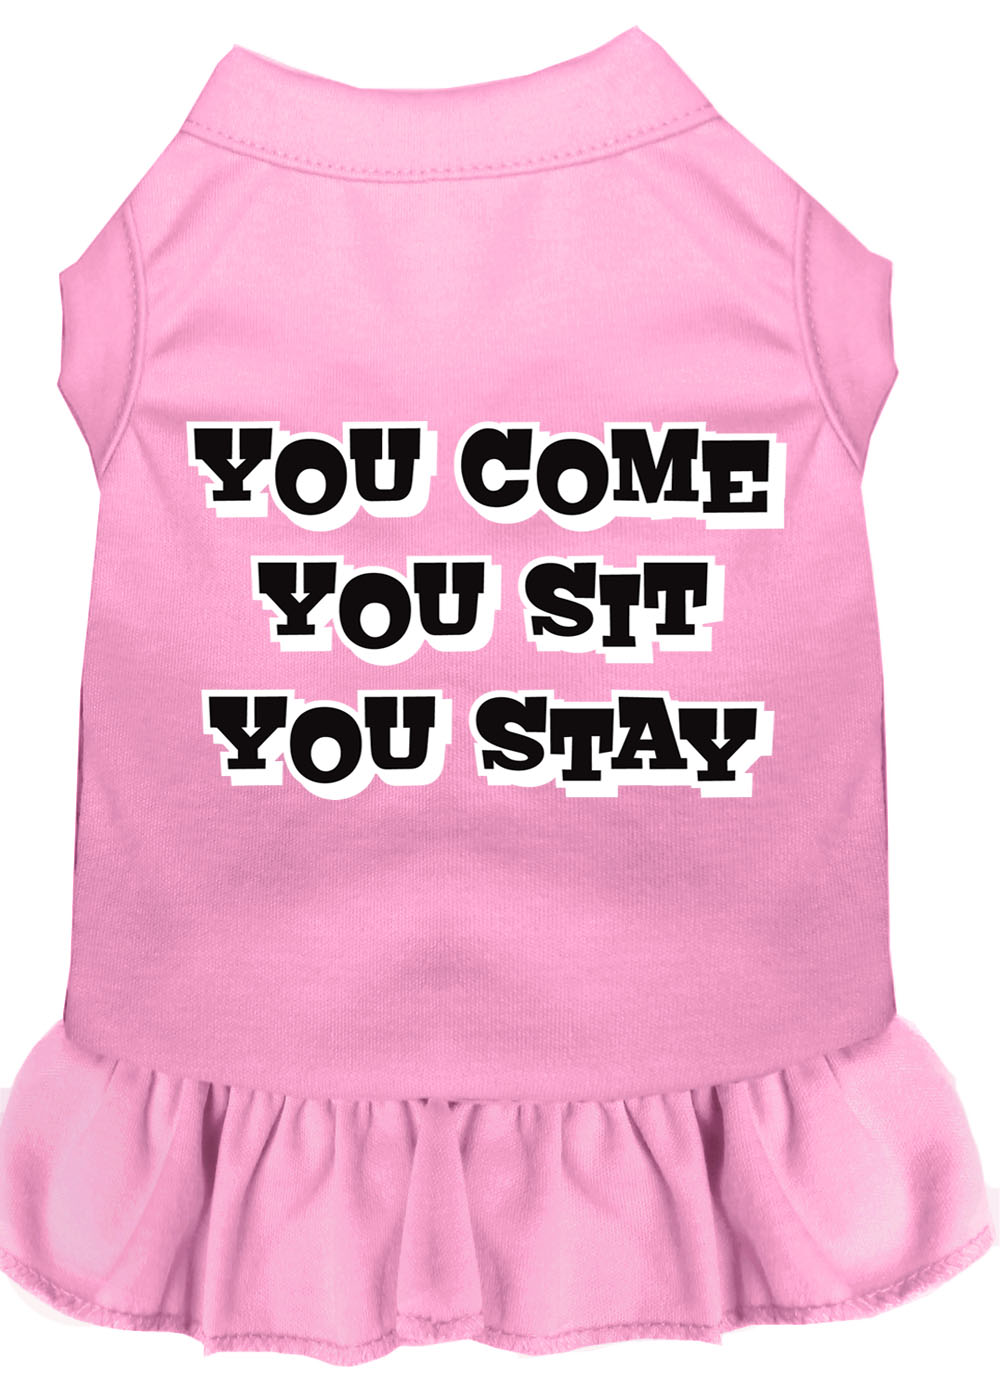 You Come, You Sit, You Stay Screen Print Dress Light Pink Med GreatEagleInc